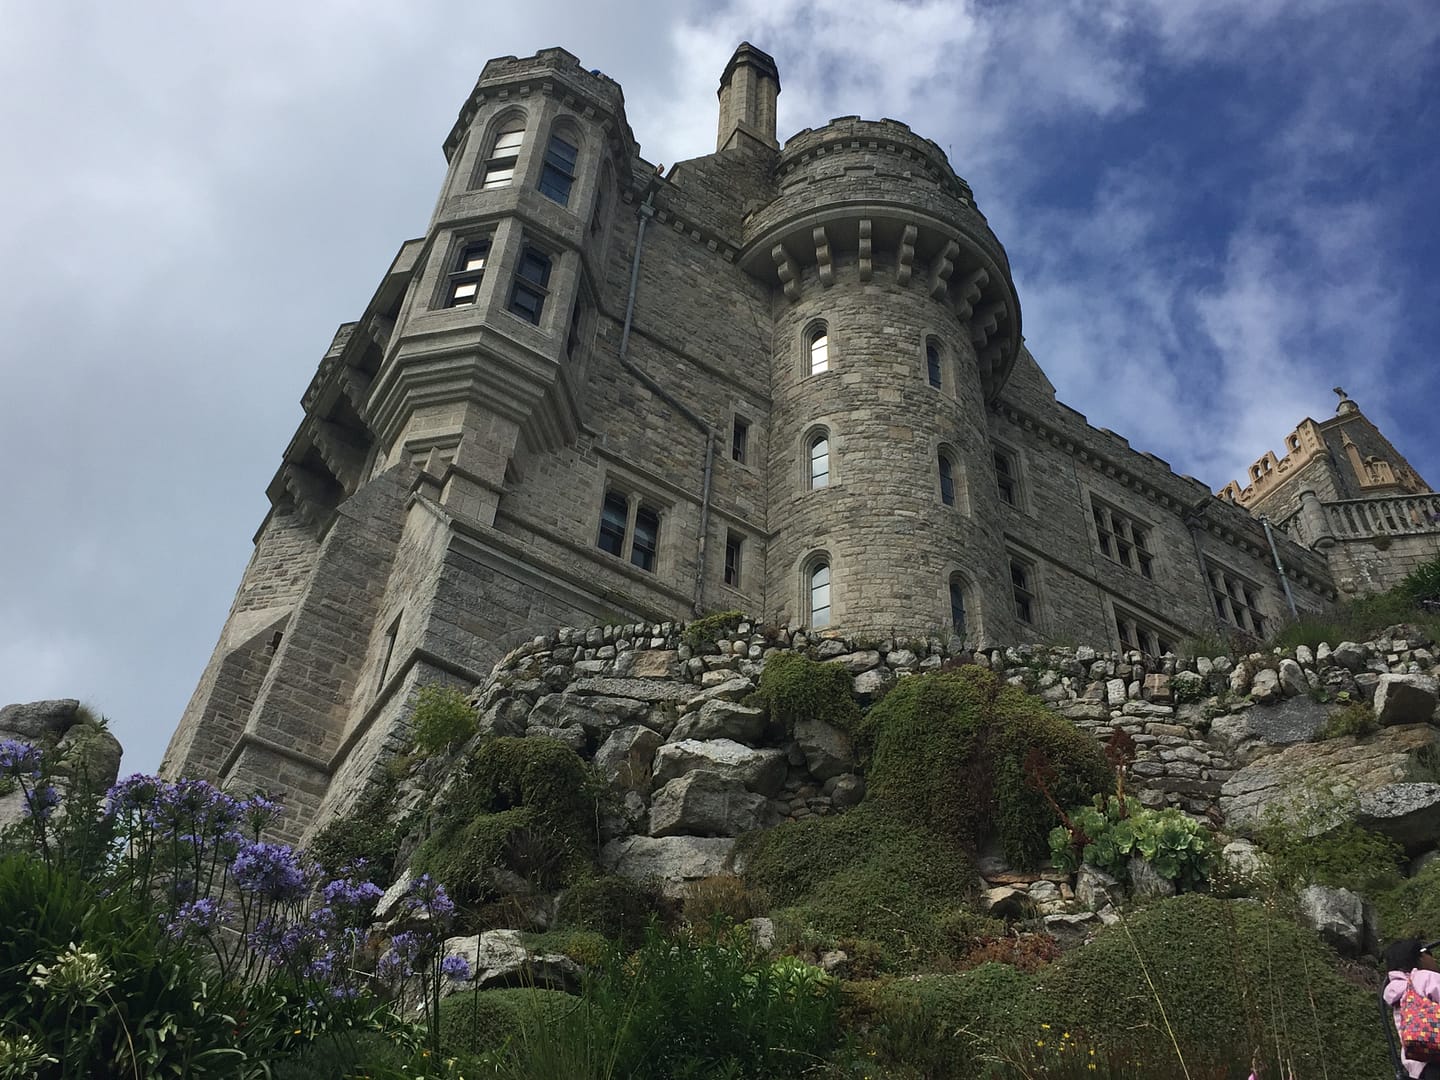 The castle at the top of St Michael's Mount seen from immediately below and looming against a cloudy sky.